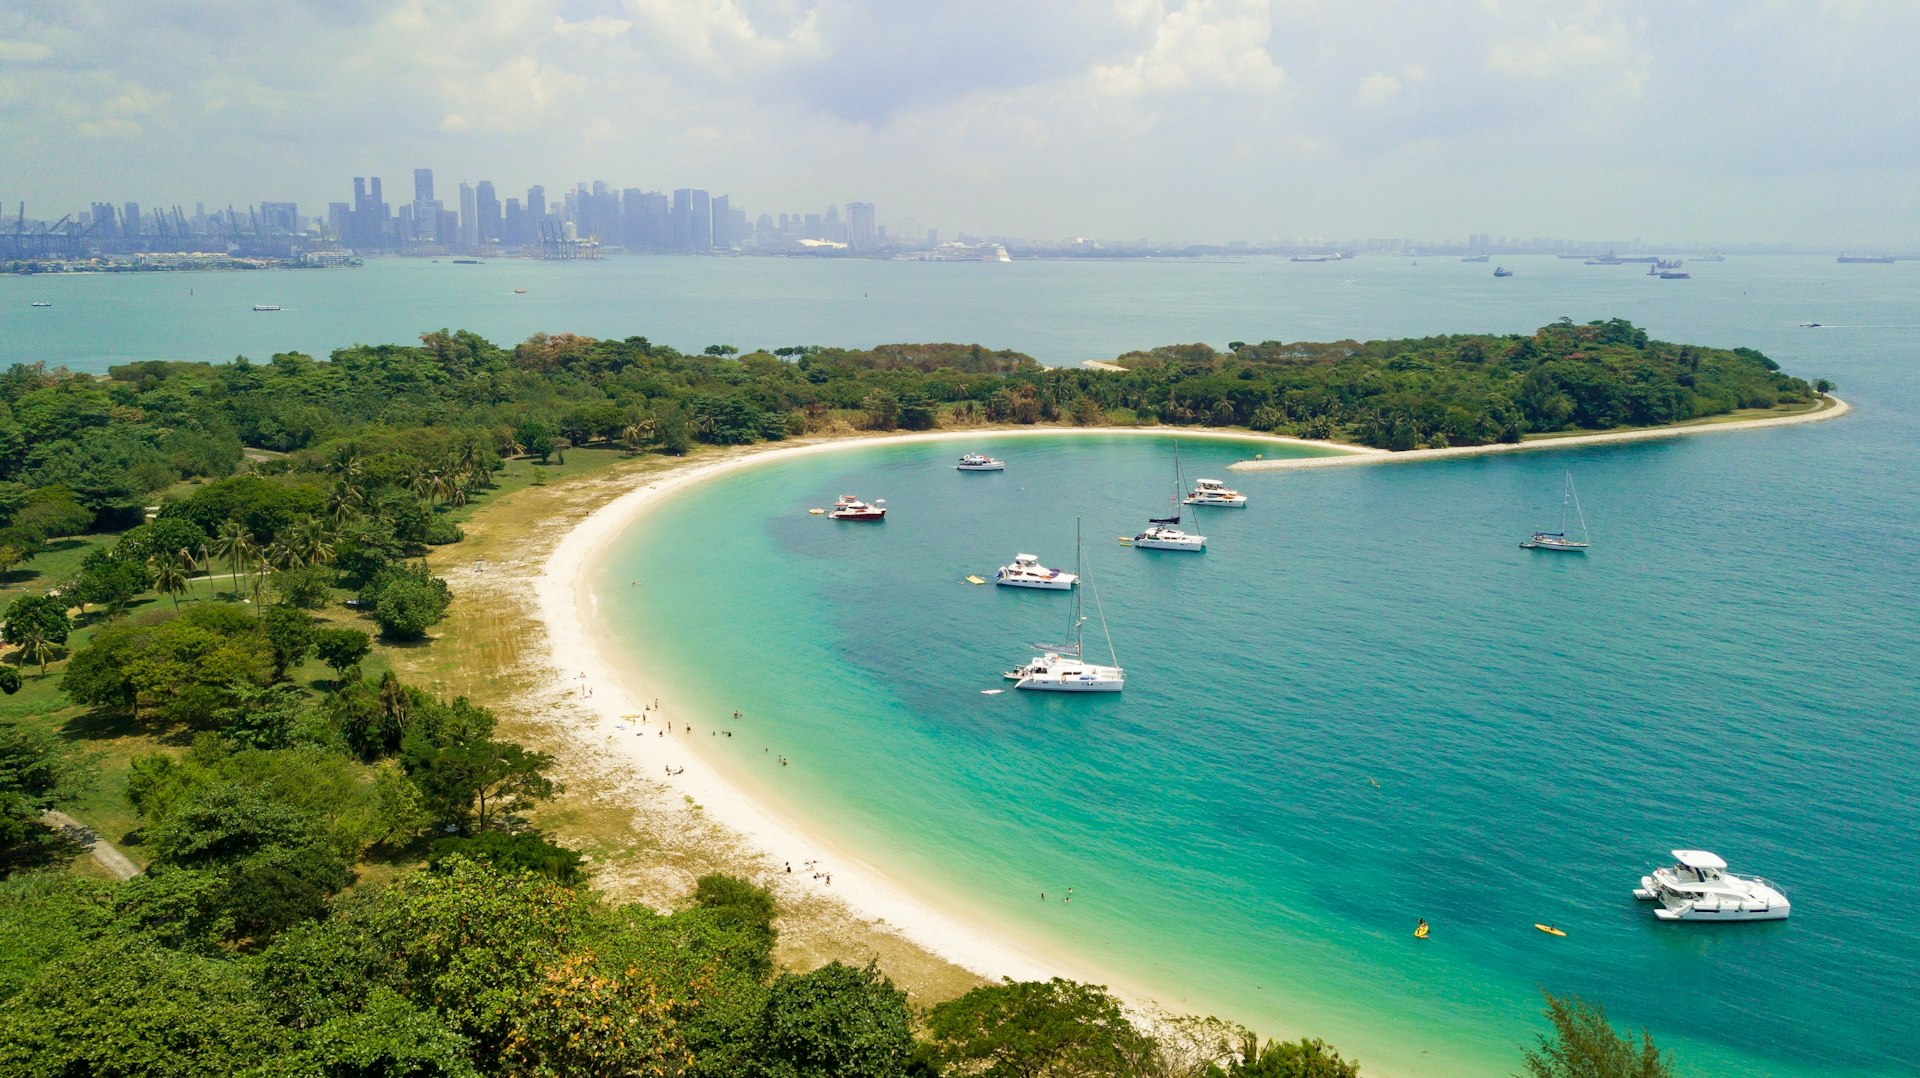 Aerial picture of the beach of Lazarus Island with yachts moored in the cove and the city visible in the distance, Singapore